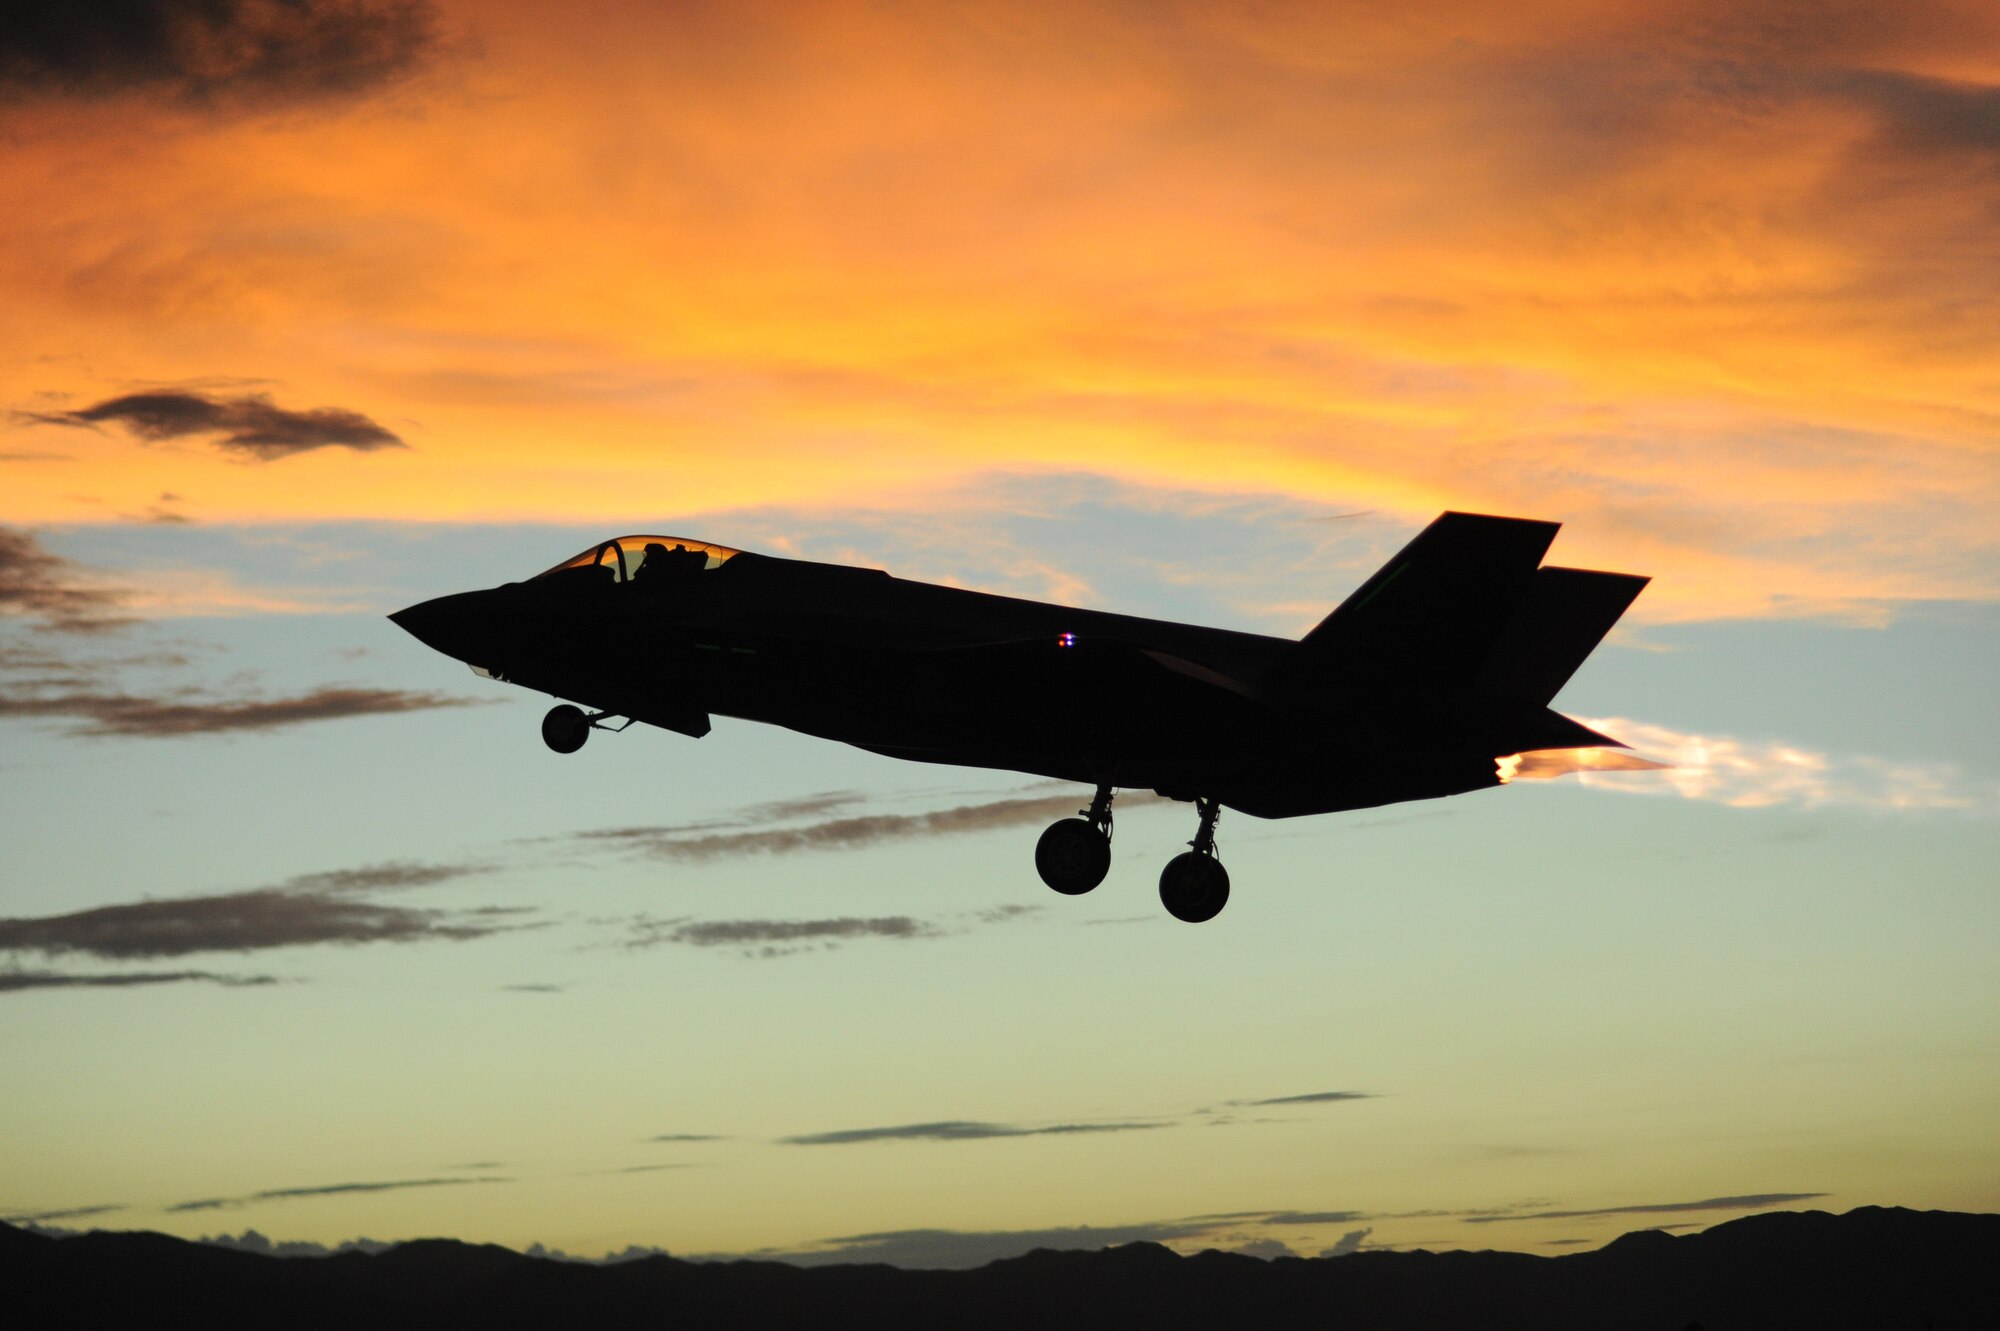 An F-35 Lightning II assigned to the 61st Fighter Squadron at Luke Air Force Base, Ariz., takes off July 28, 2015. Since 2010, the F-35 has flown more than 30,000 hours. (U.S. Air Force photo/Staff Sgt. Staci Miller)